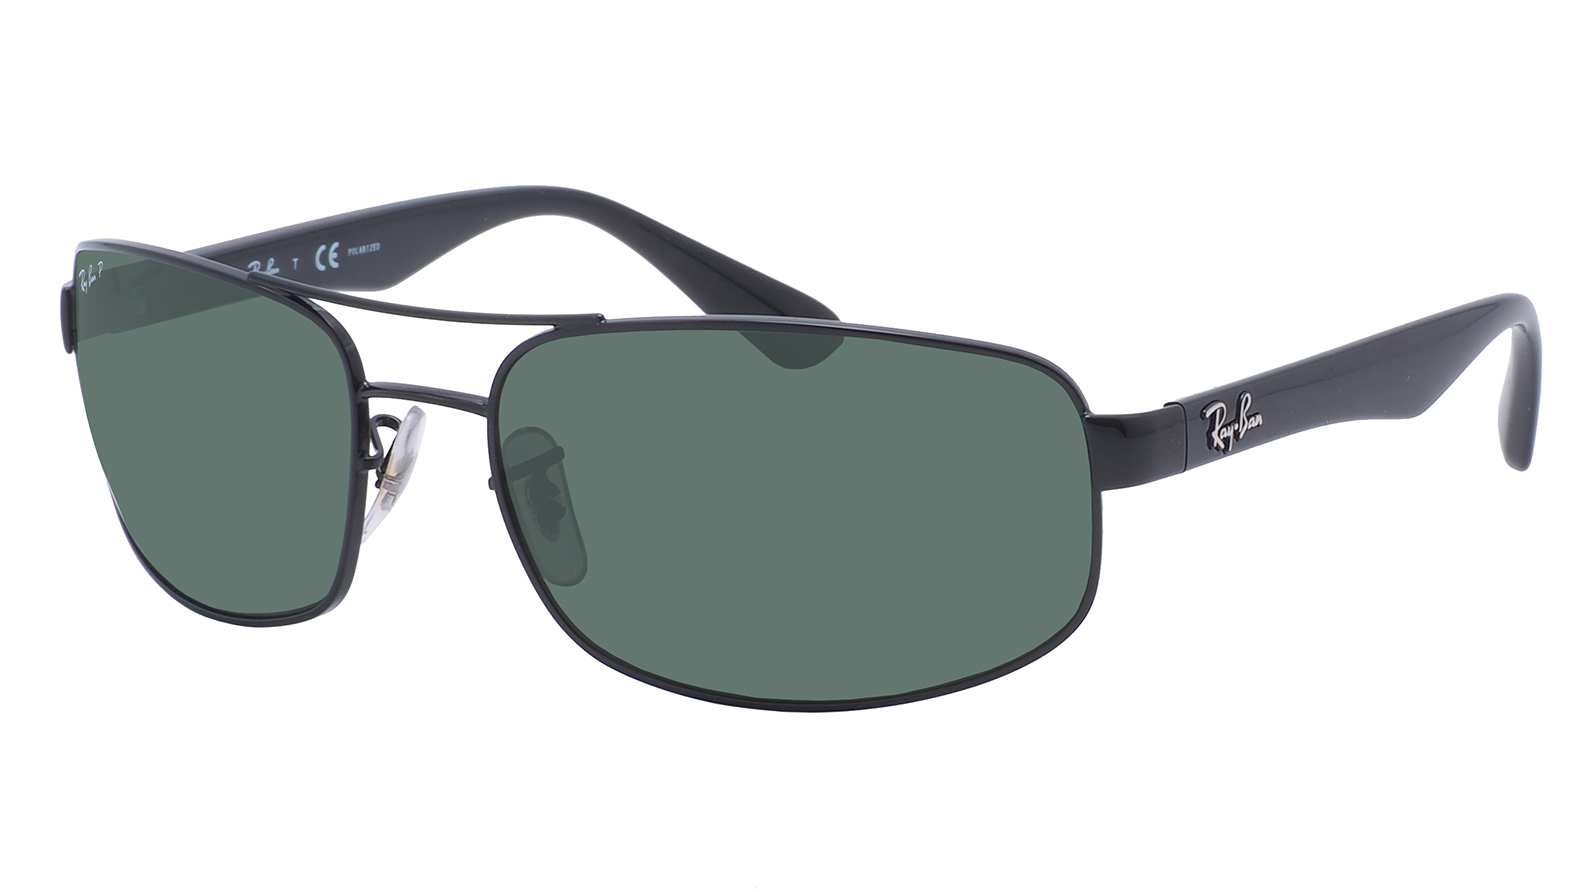 Ray-Ban Active Lifestyle RB 3445 002/58 ray ban active lifestyle rx 6356 2875